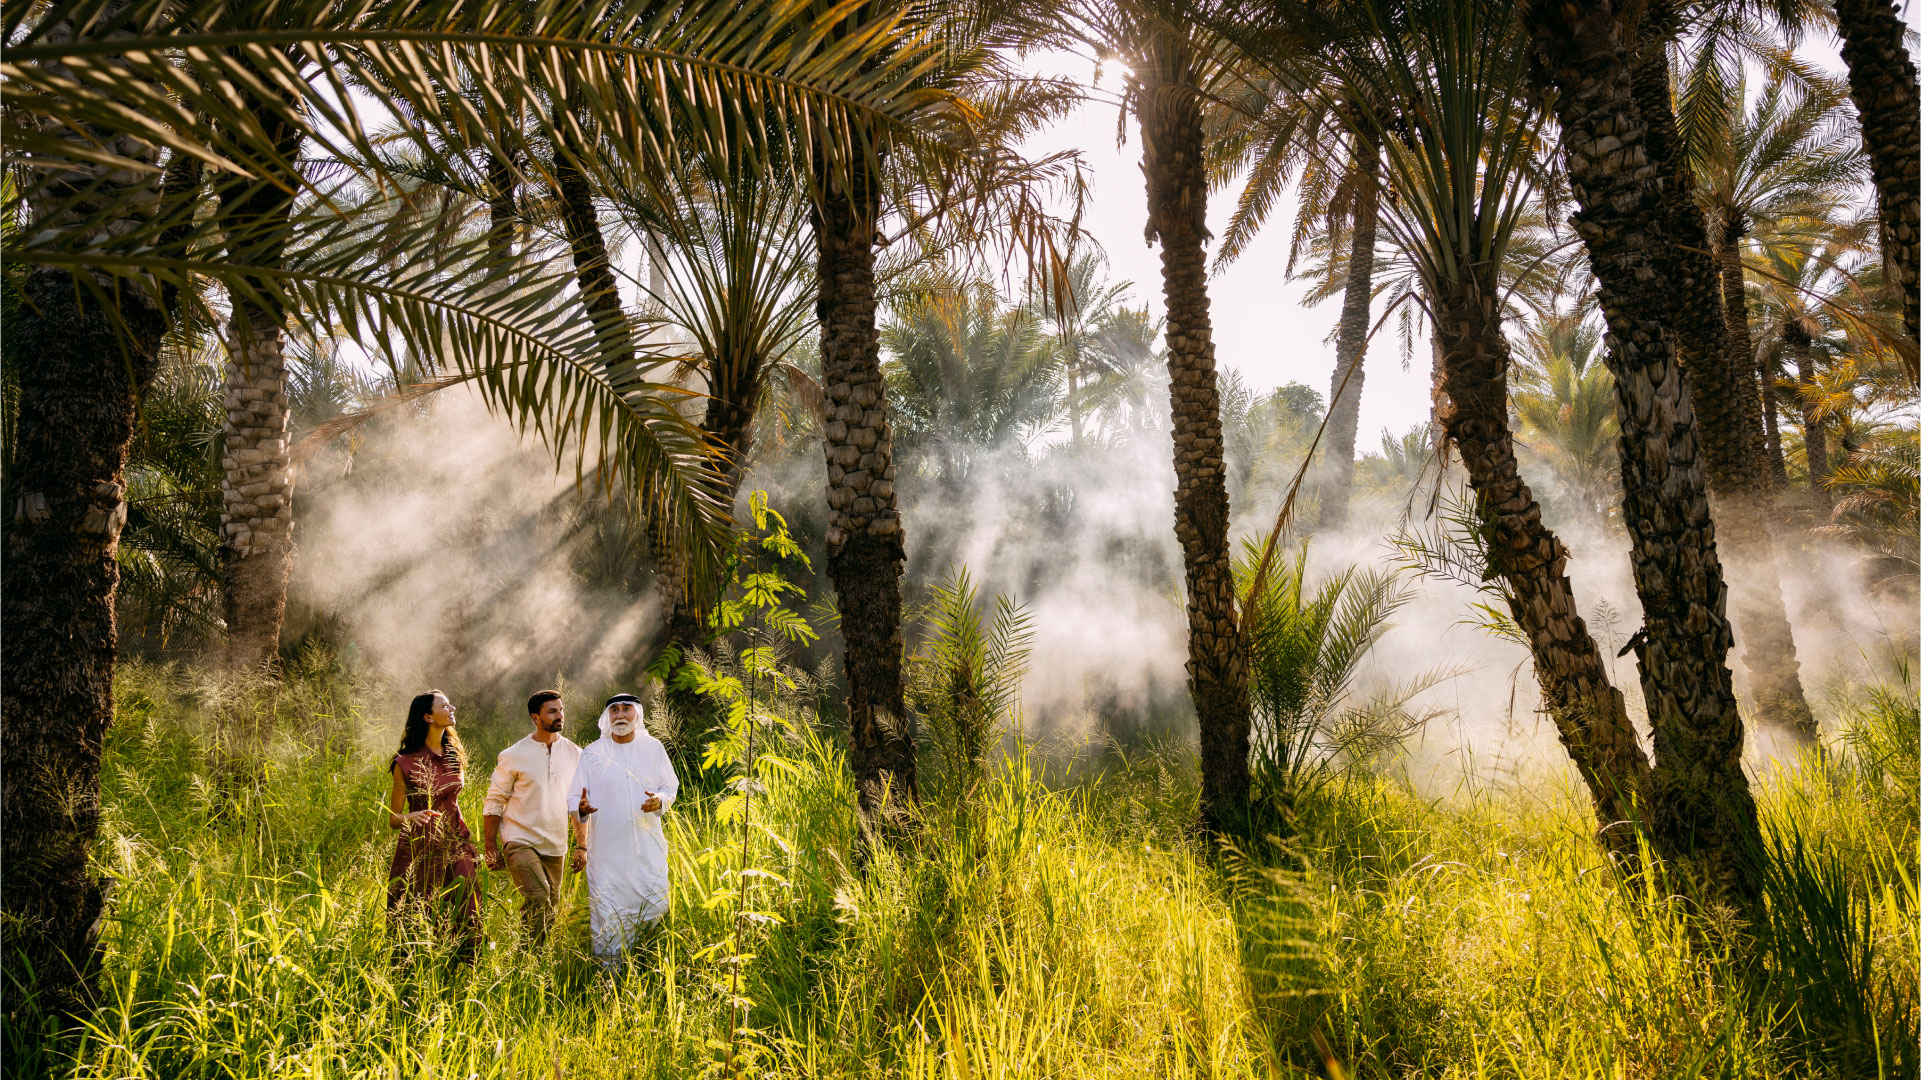 A couple on a visit to one of Abu Dhabi's green Al Ain oases with an Emirati guide